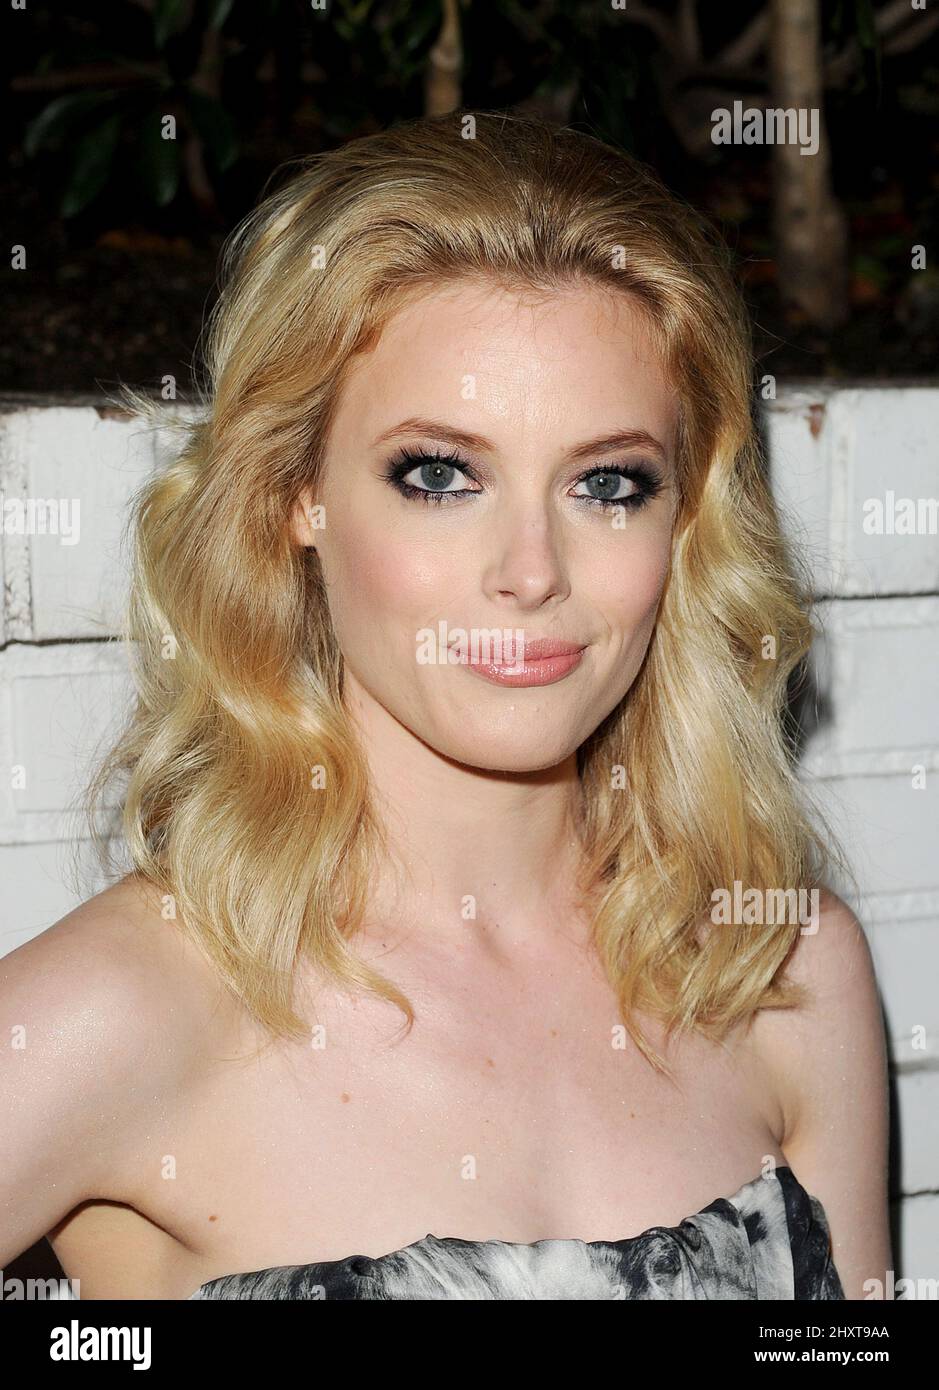 Gillian Jacobs at EW's 2011 Pre Screen Actors Guild Awards Party, held at Chateau Marmont in Los Angeles, CA. Stock Photo